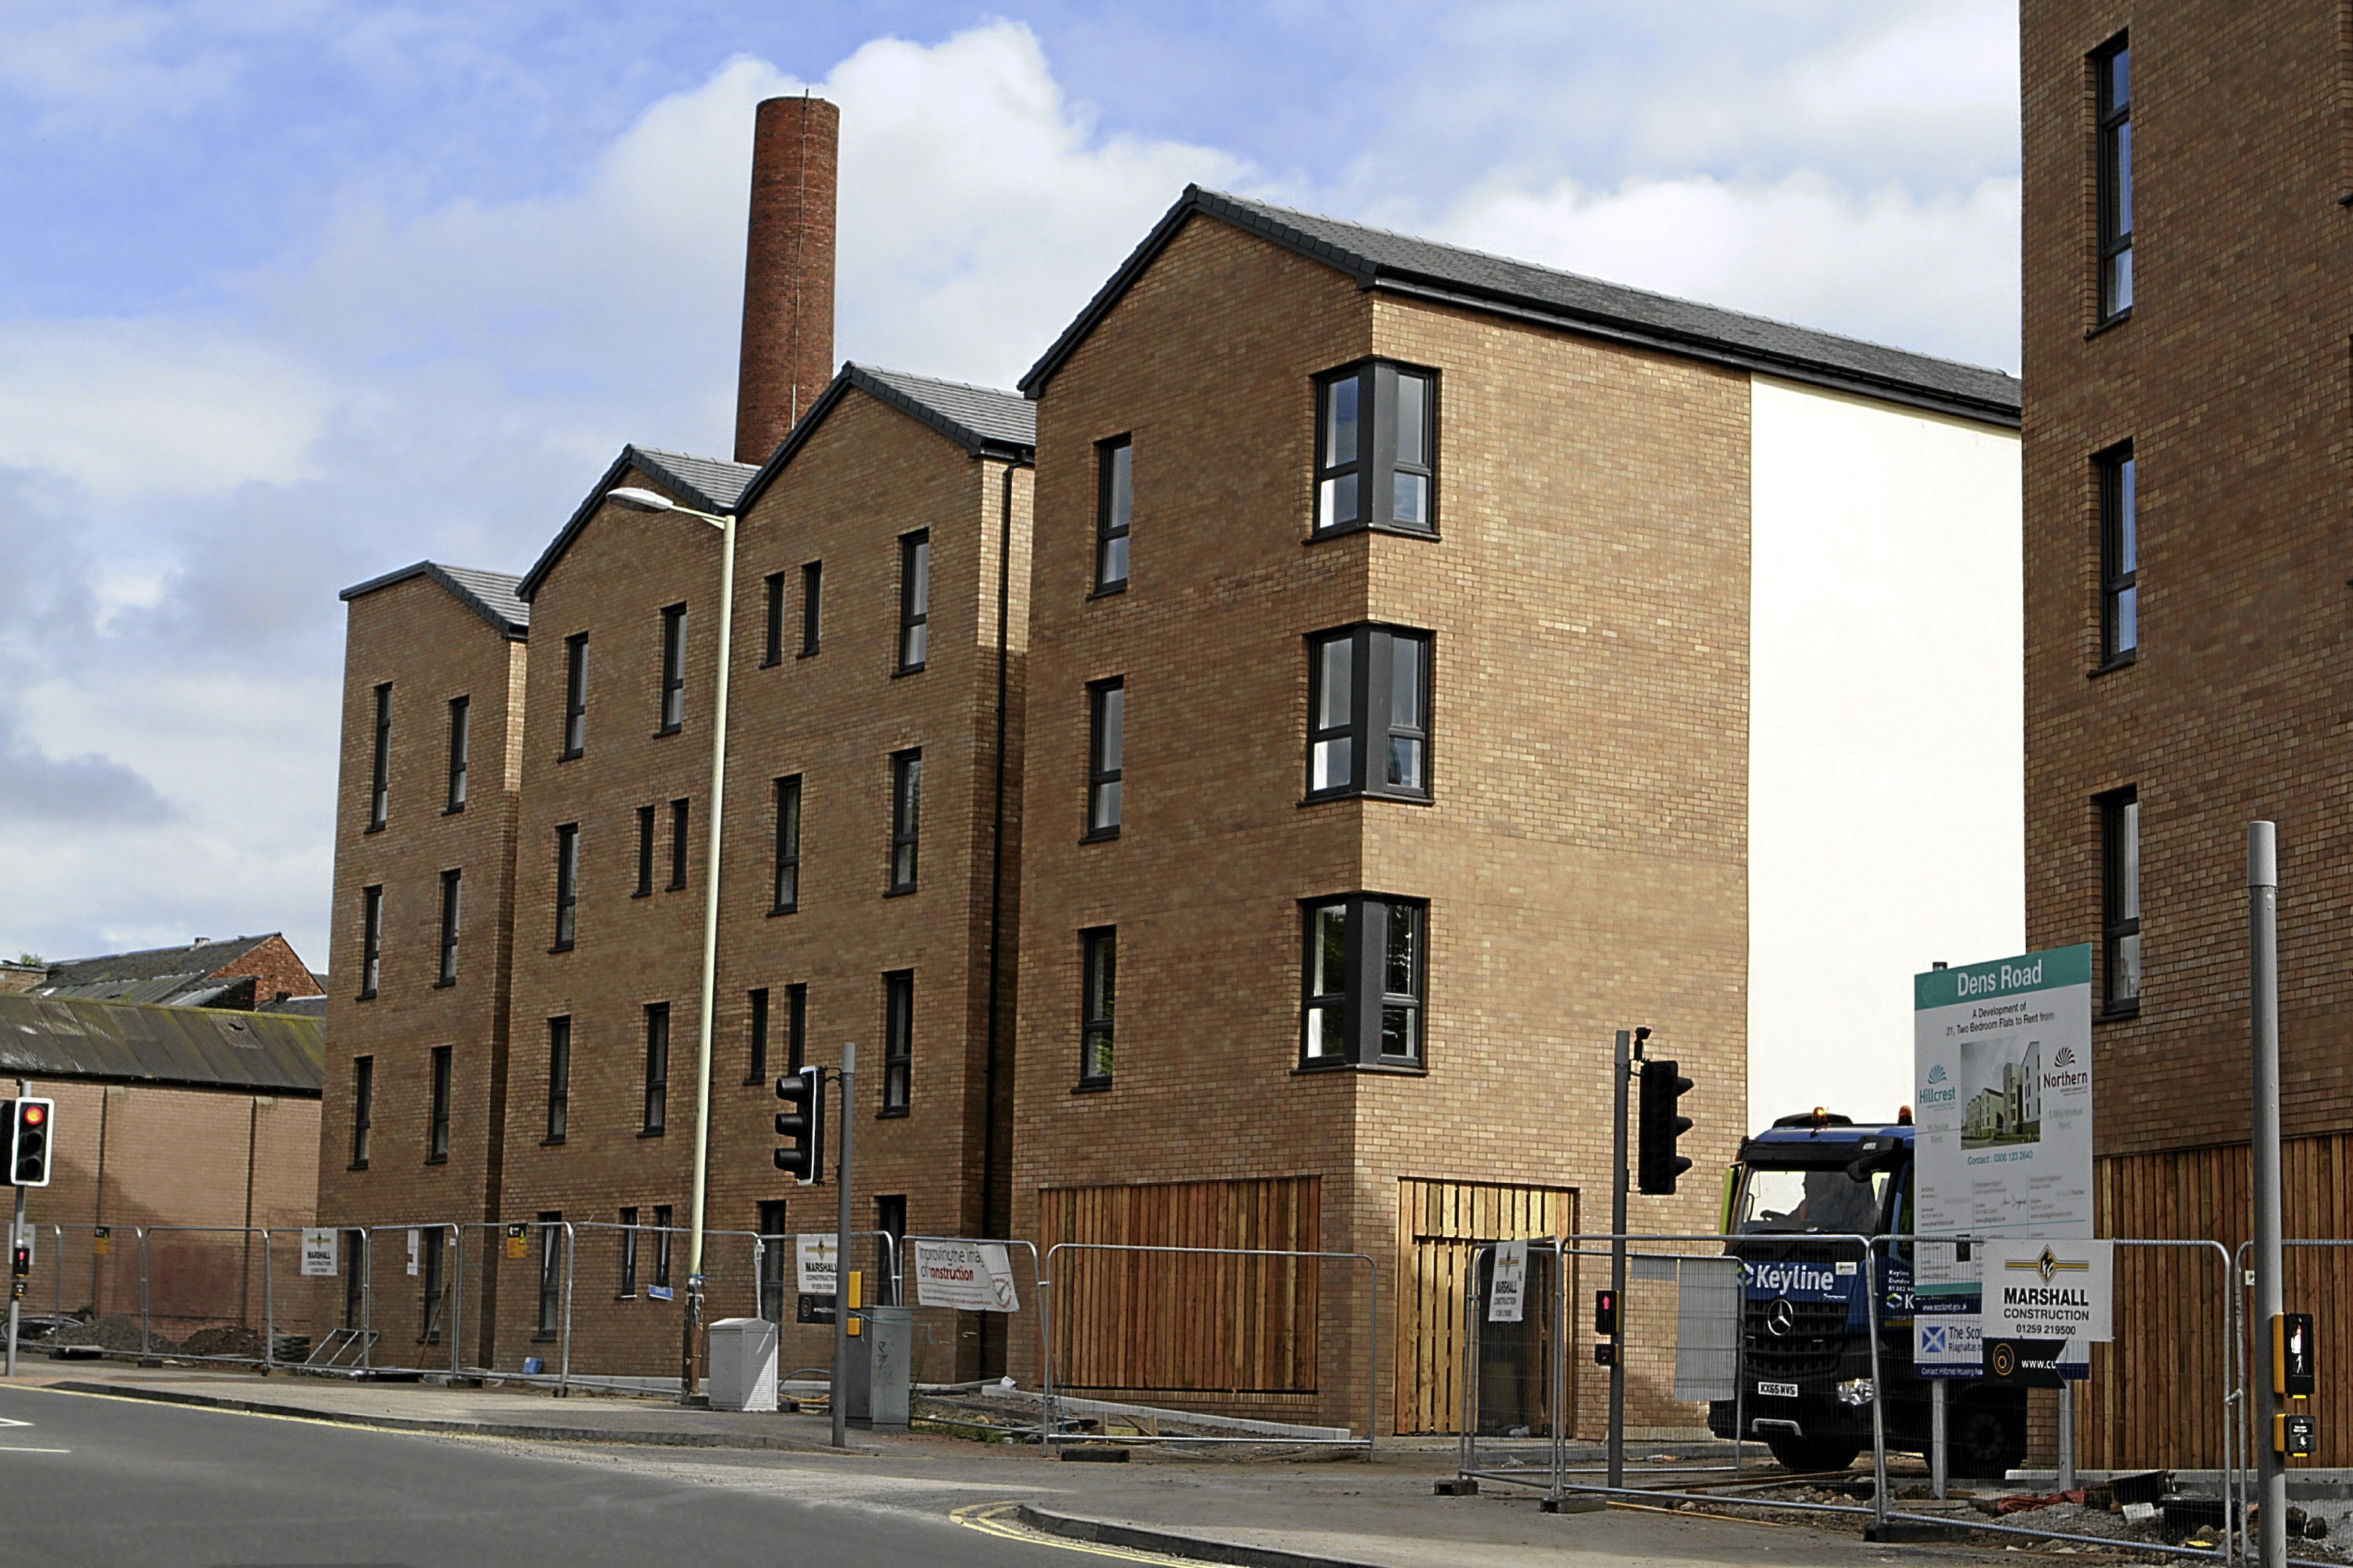 The new homes on Dens Road.